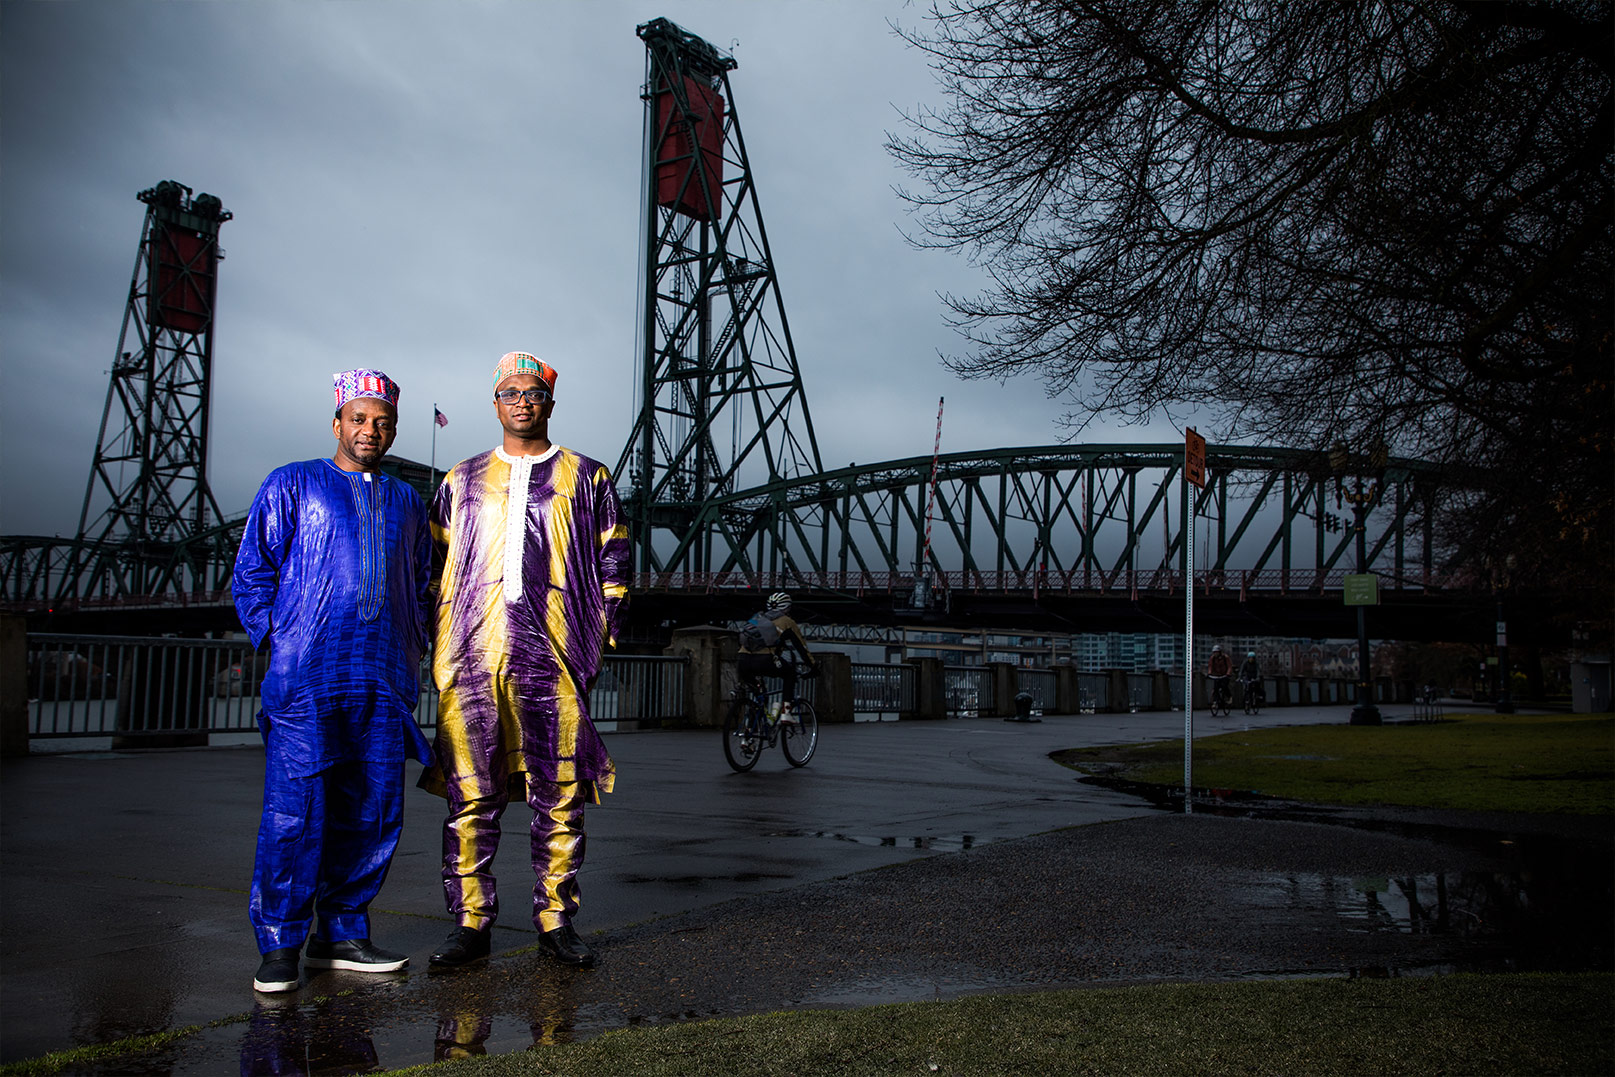 Photograph of brothers Ibrahima and Abdoulaye Barry in front of a bridge on the Willamette River in Portland, Oregon